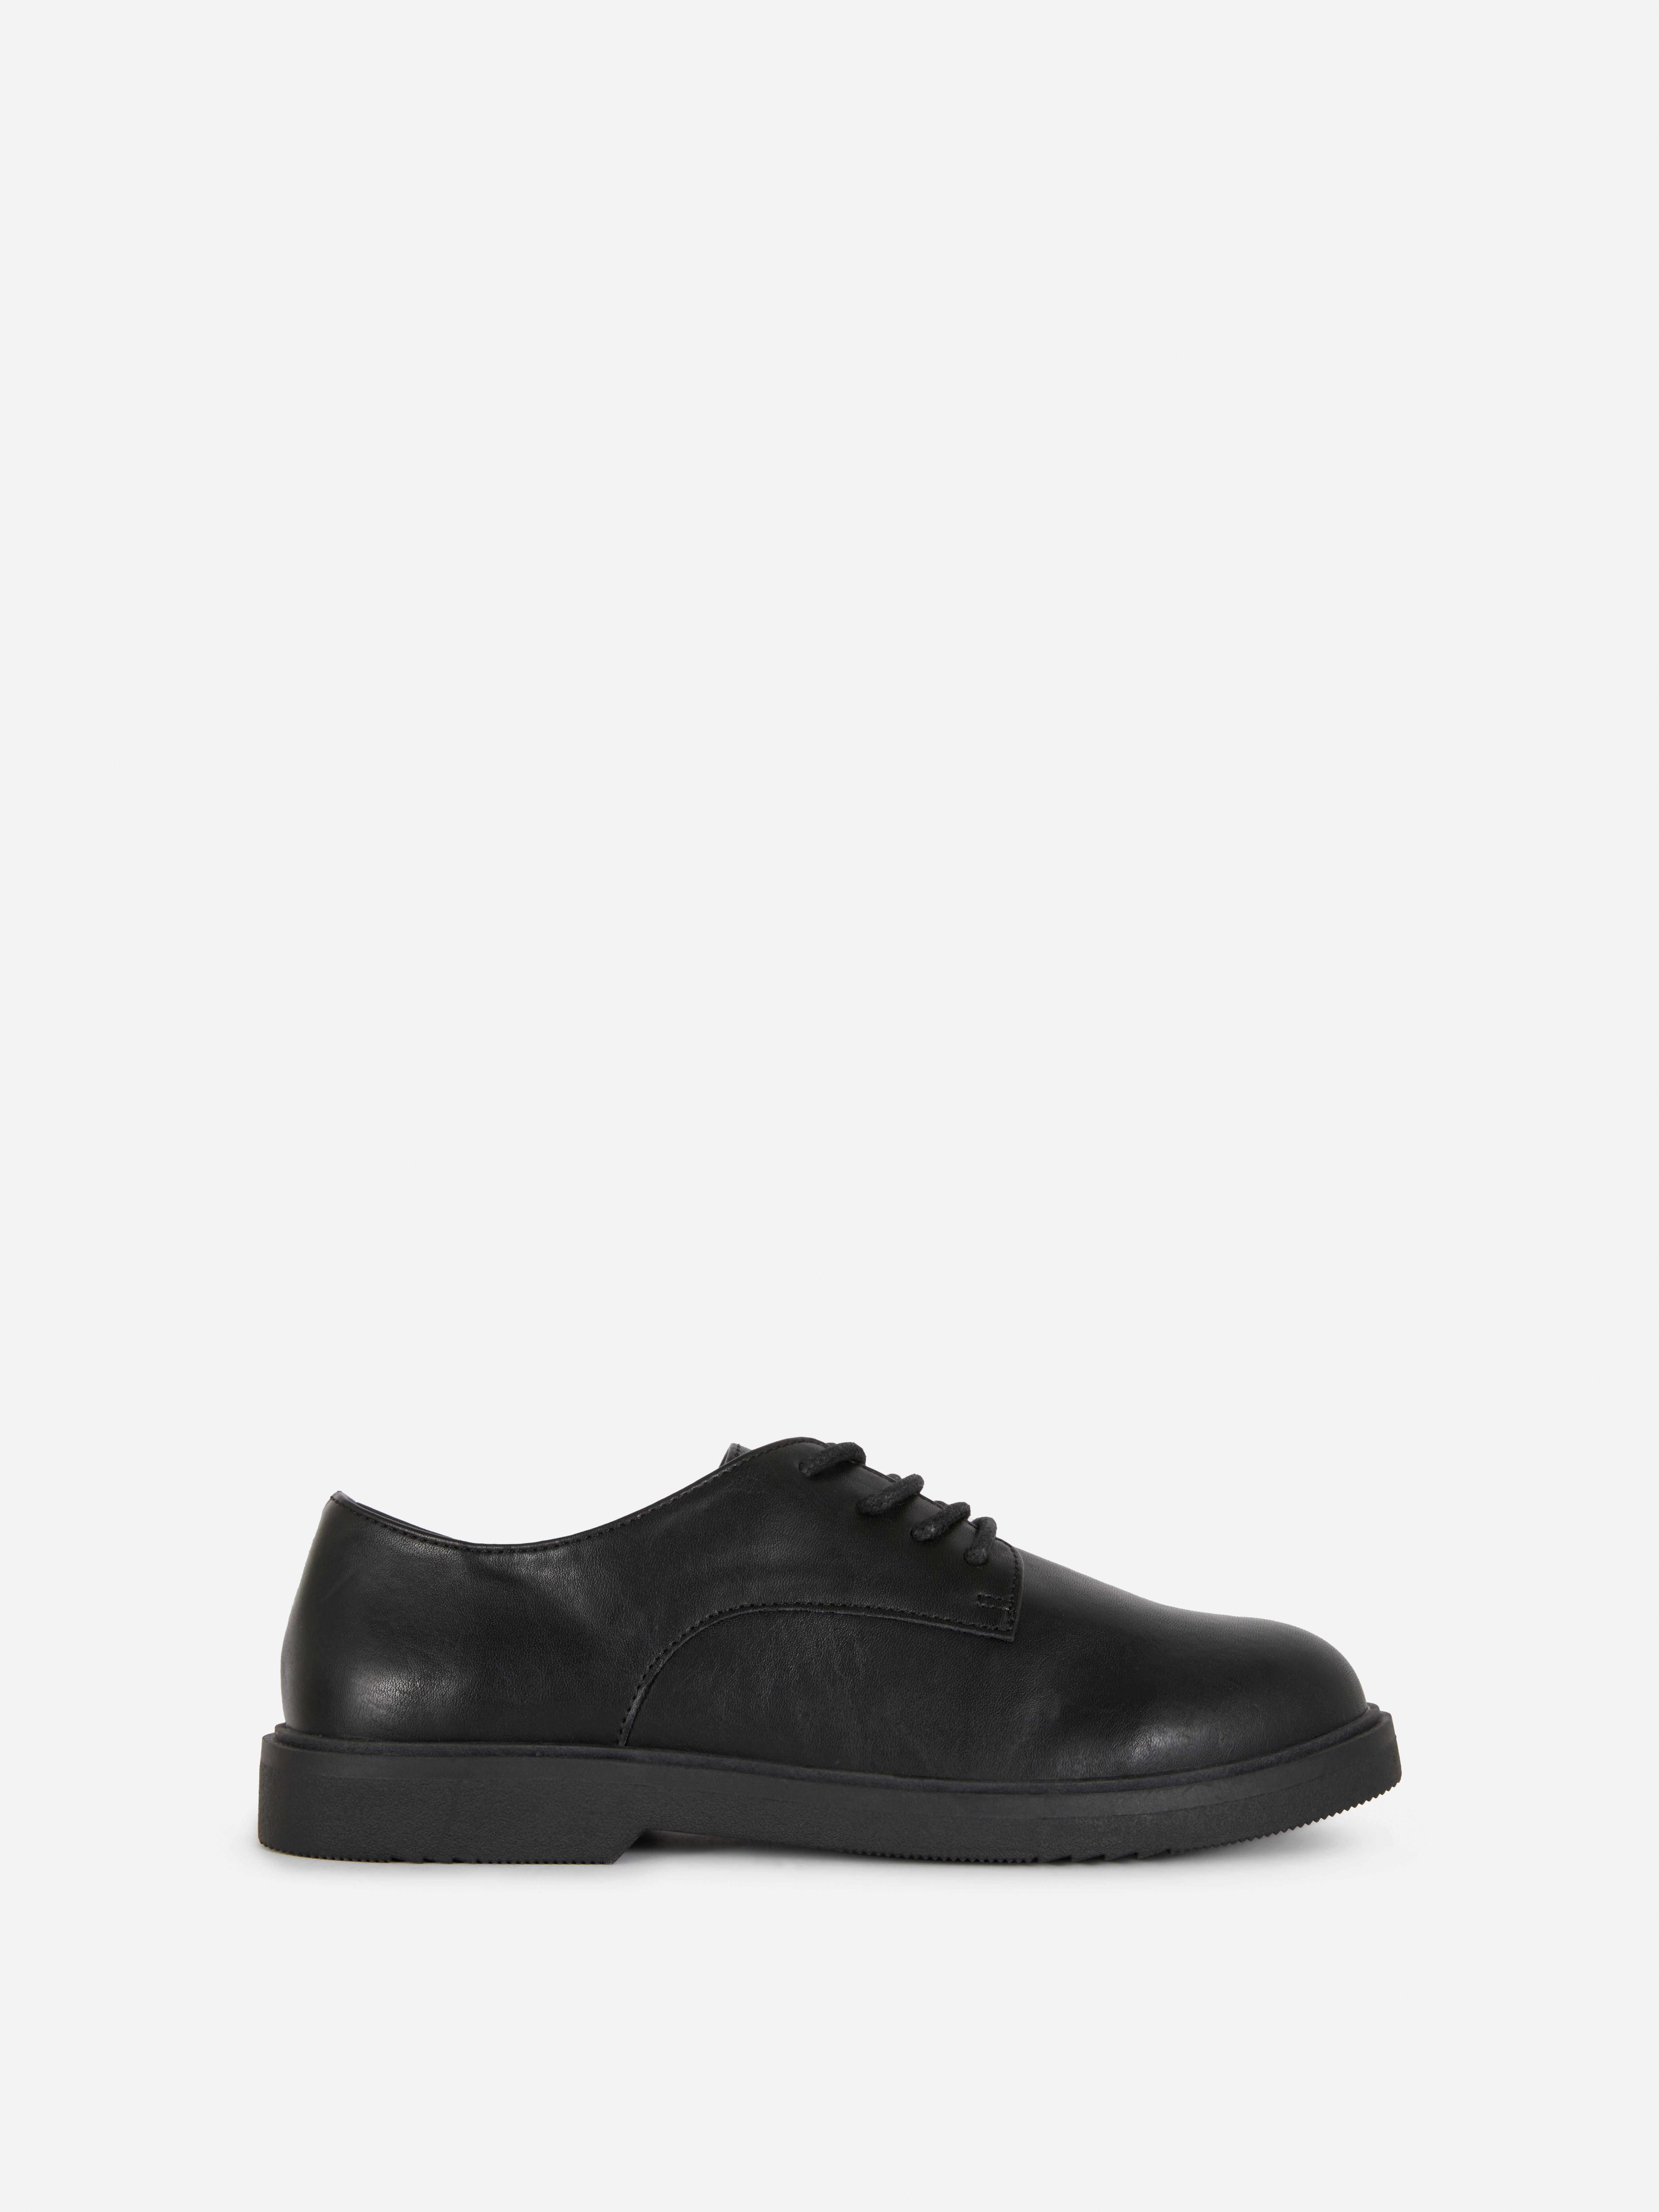 Classic Derby School Shoes